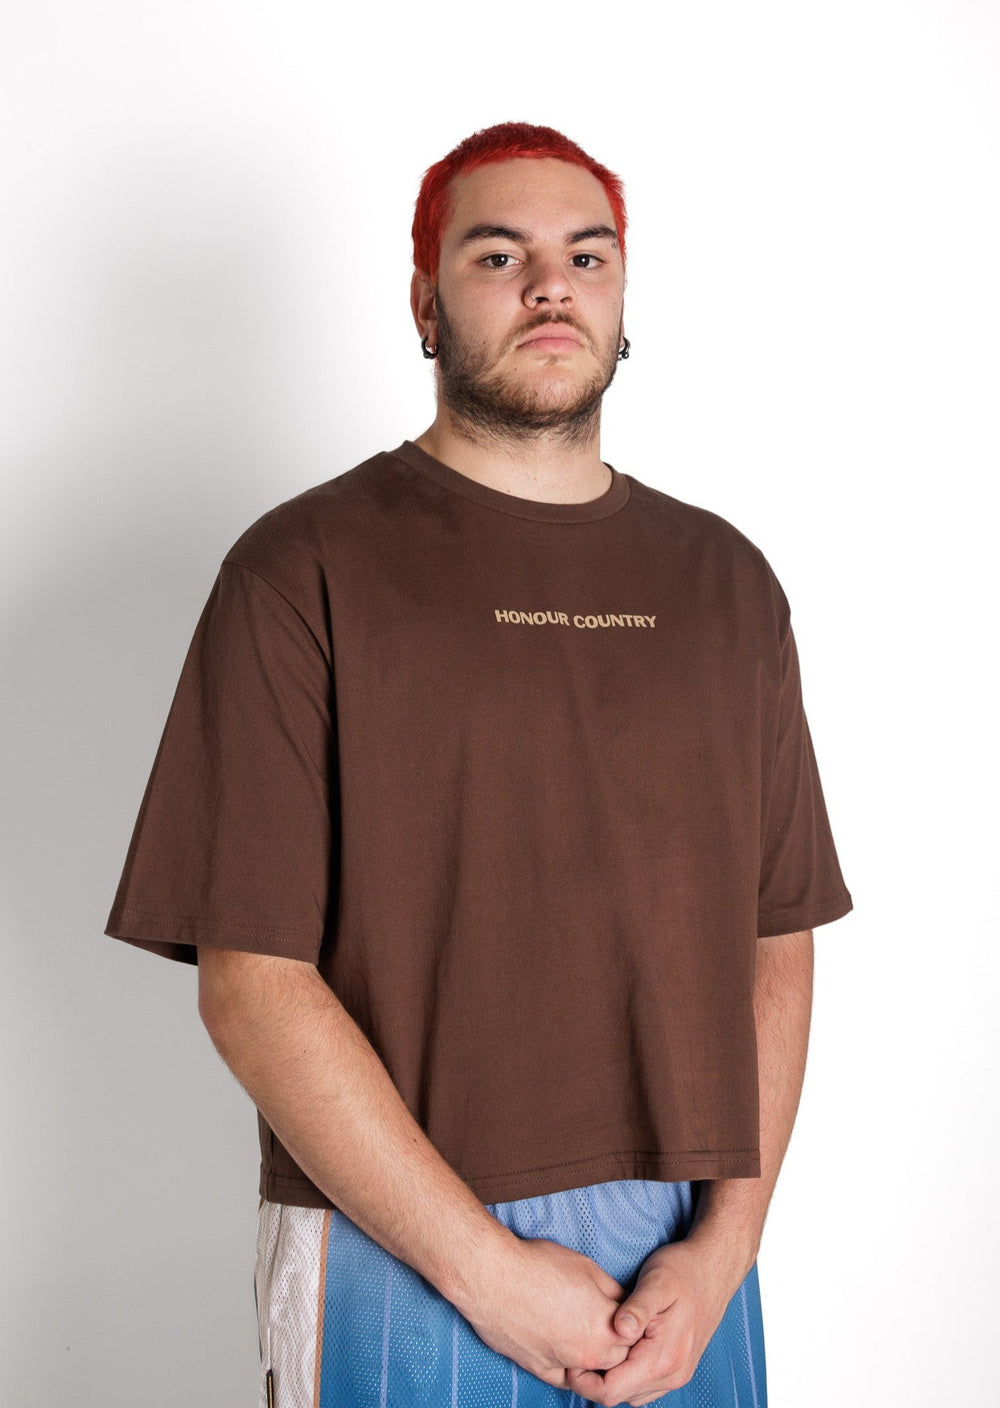 Clothing The Gaps. Honour Country Crop Tee. Chocolate brown cropped tee. On front in contrasting light brown 'Honour Country' small in centre across chest in bold capital text. On back in same text big back piece 'Honour and respect Aboriginal and Torres Strait Islander people as the rightful custodians of country.' 